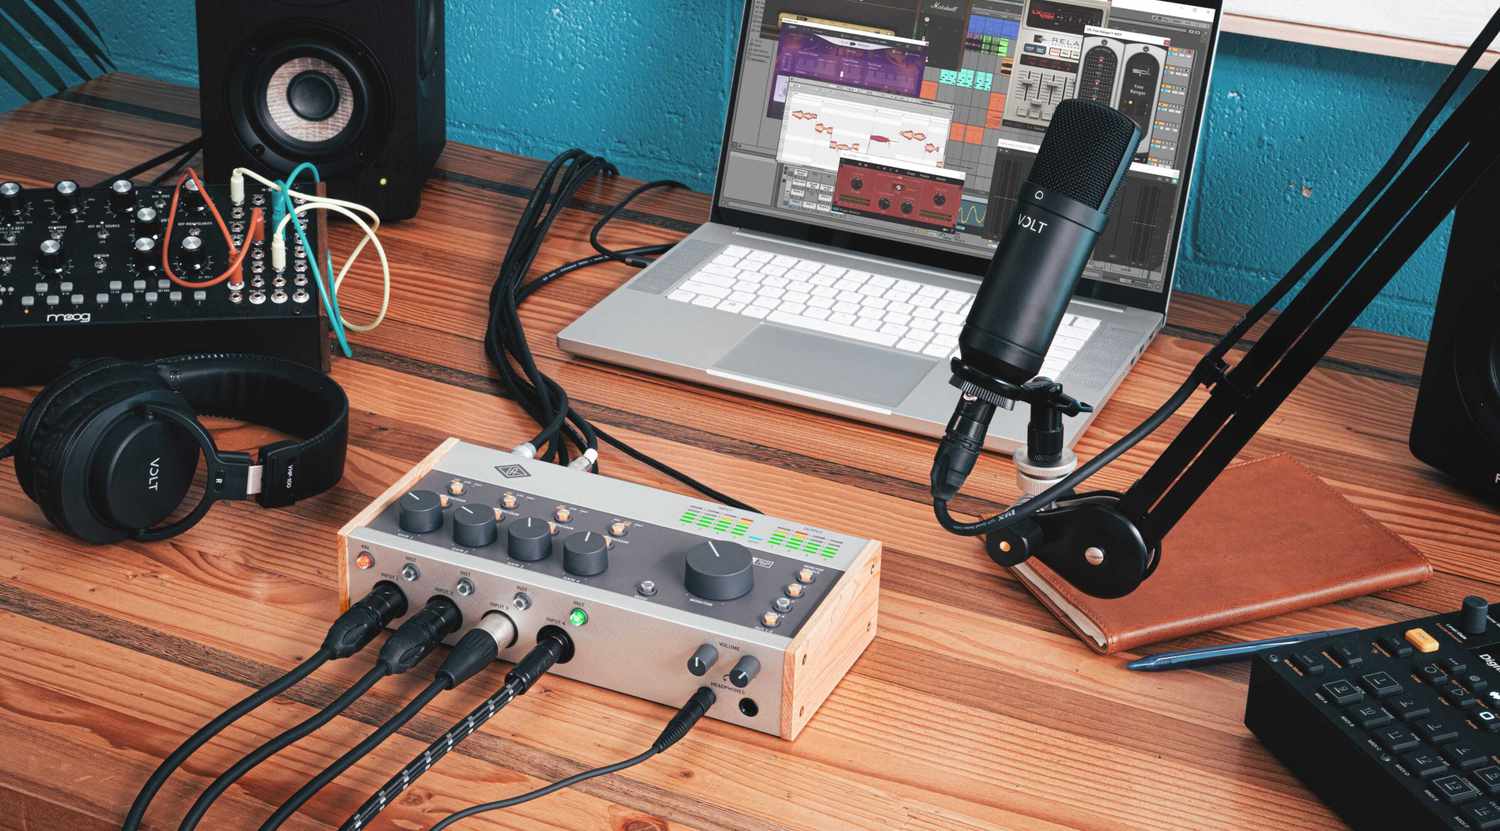 How To Play USB Microphone Audio Through Speakers